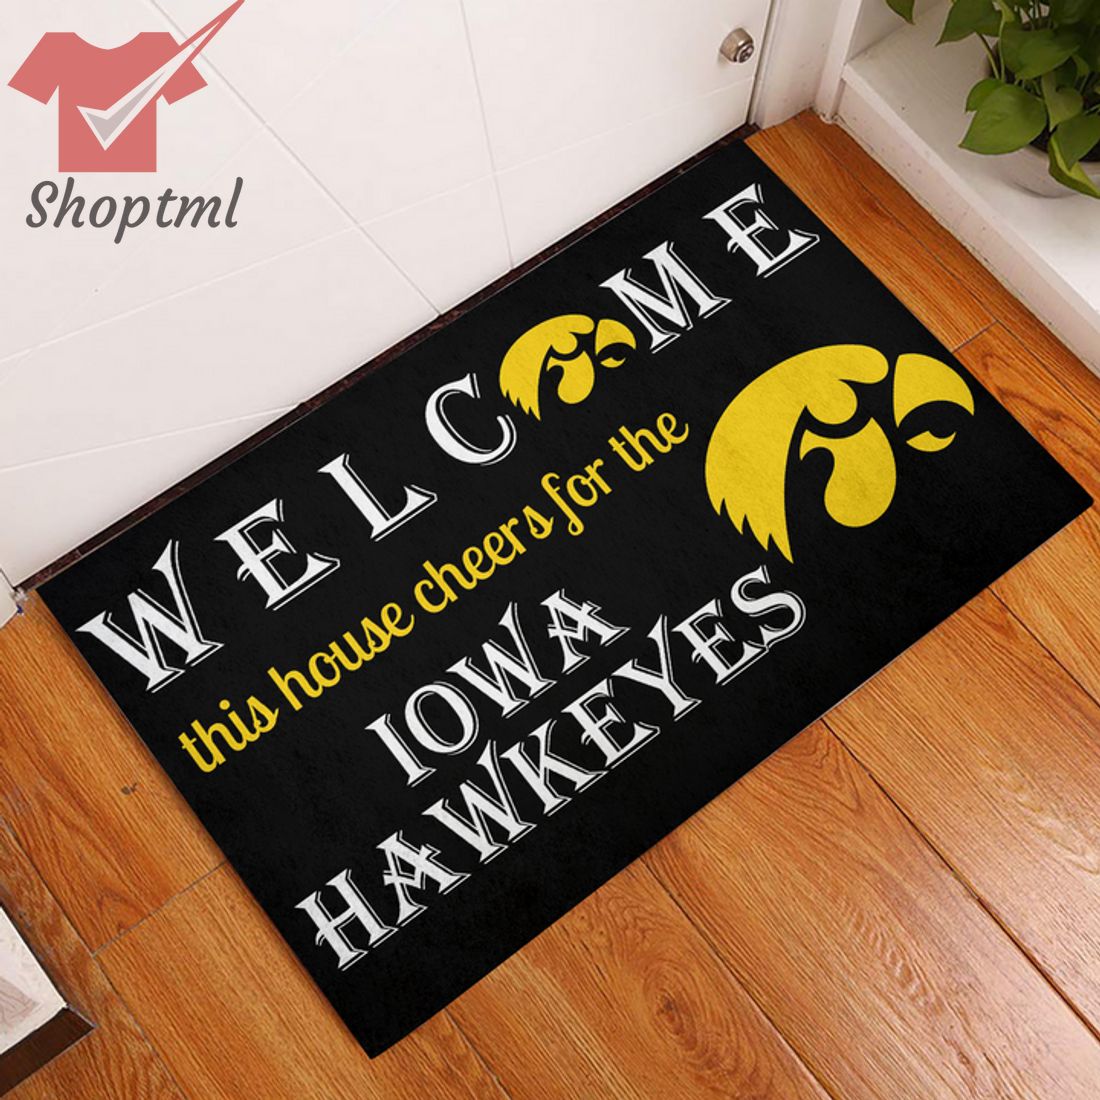 Welcome This House Cheers For The Iowa Hawkeyes Doormat